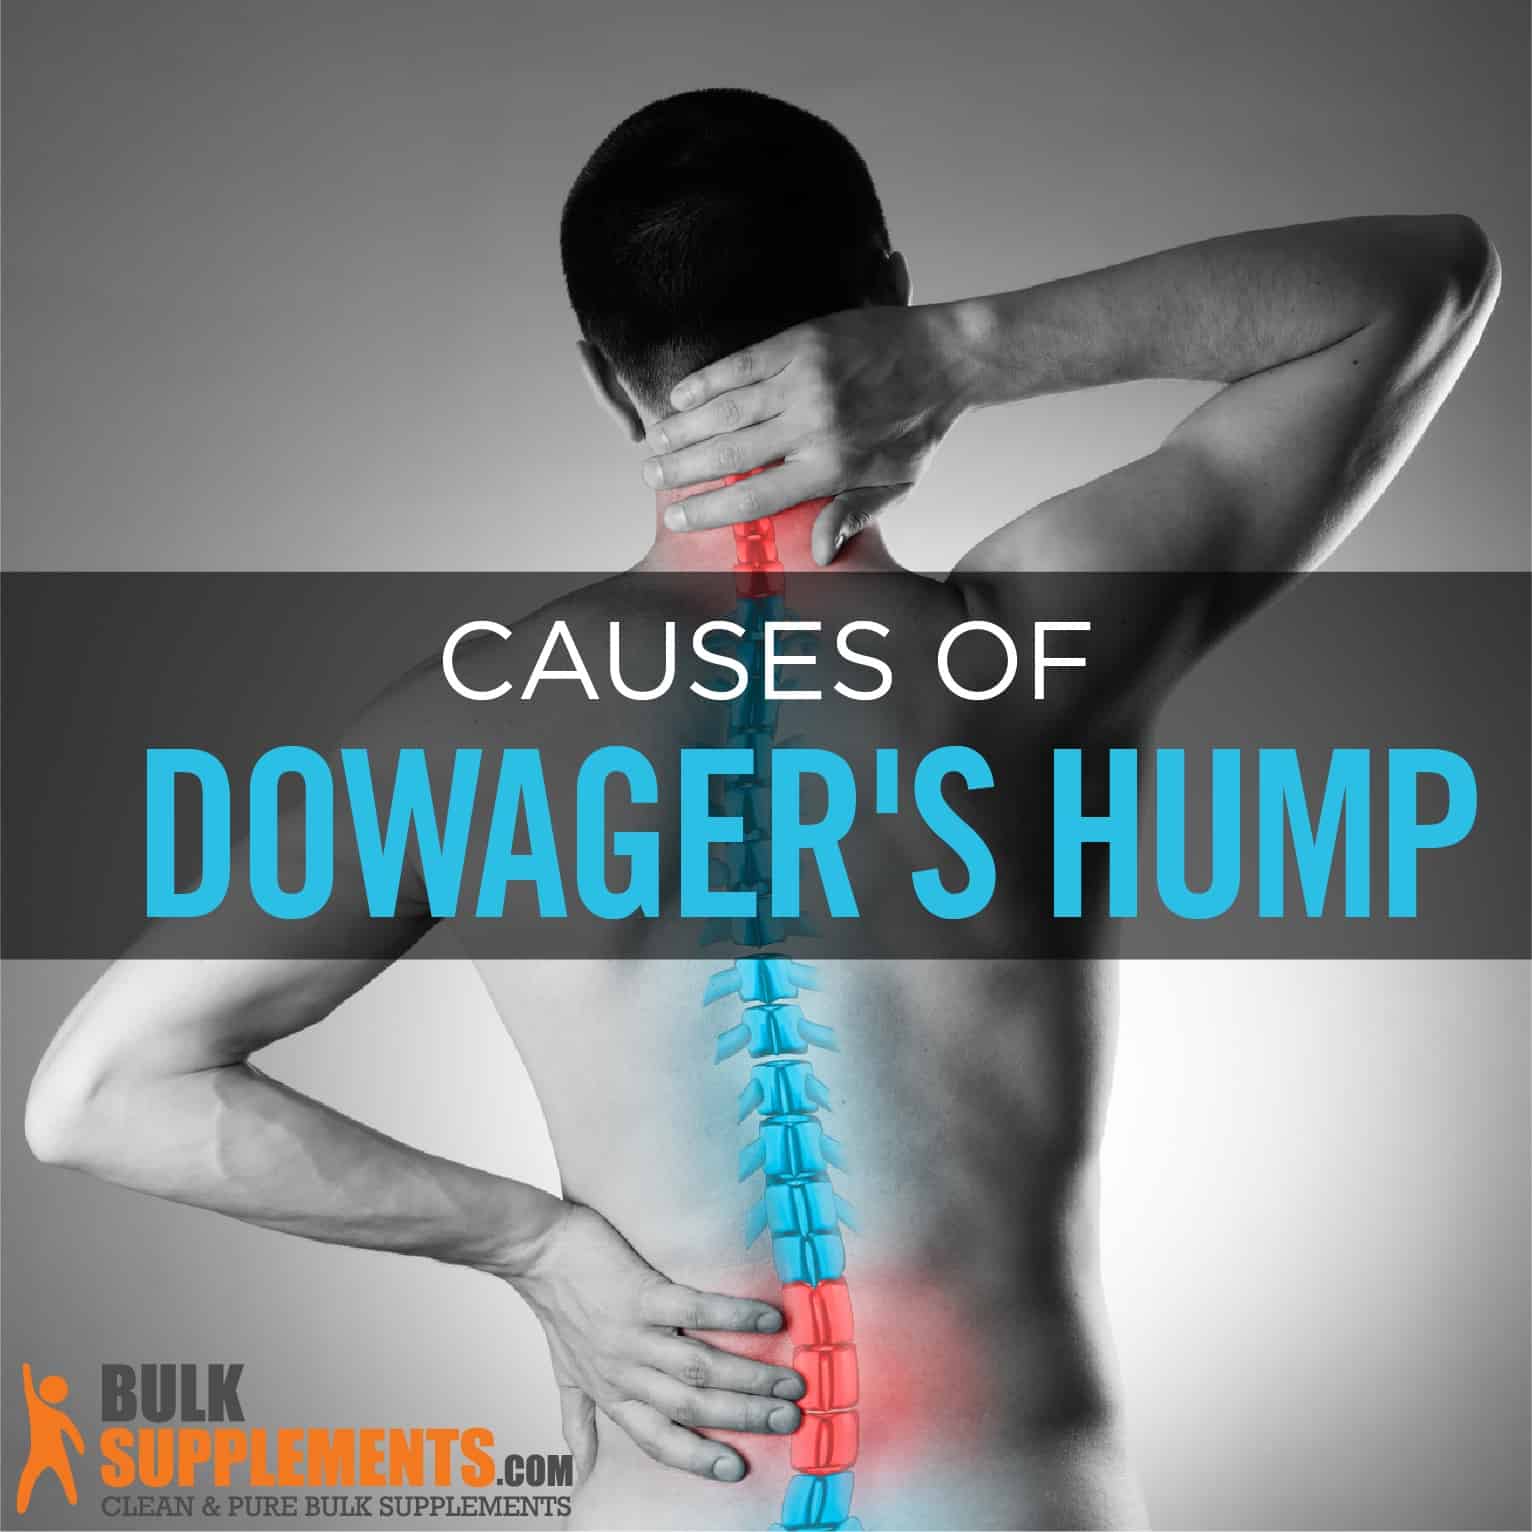 Dowager's Hump: Symptoms, Causes & Treatment